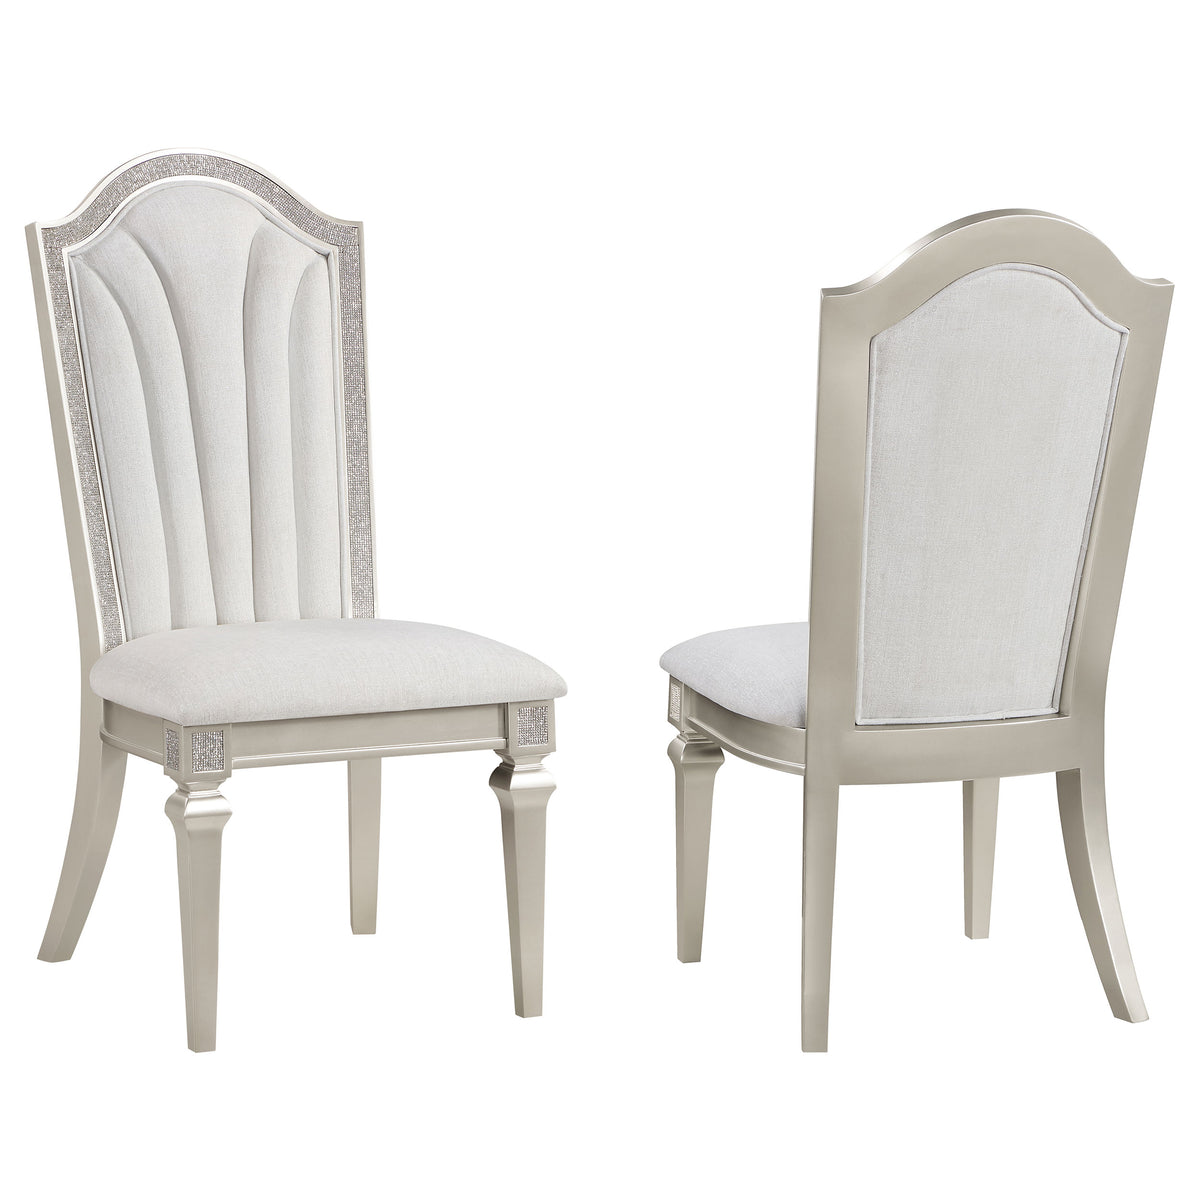 Evangeline Upholstered Dining Side Chair with Faux Diamond Trim Ivory and Silver Oak (Set of 2)  Half Price Furniture